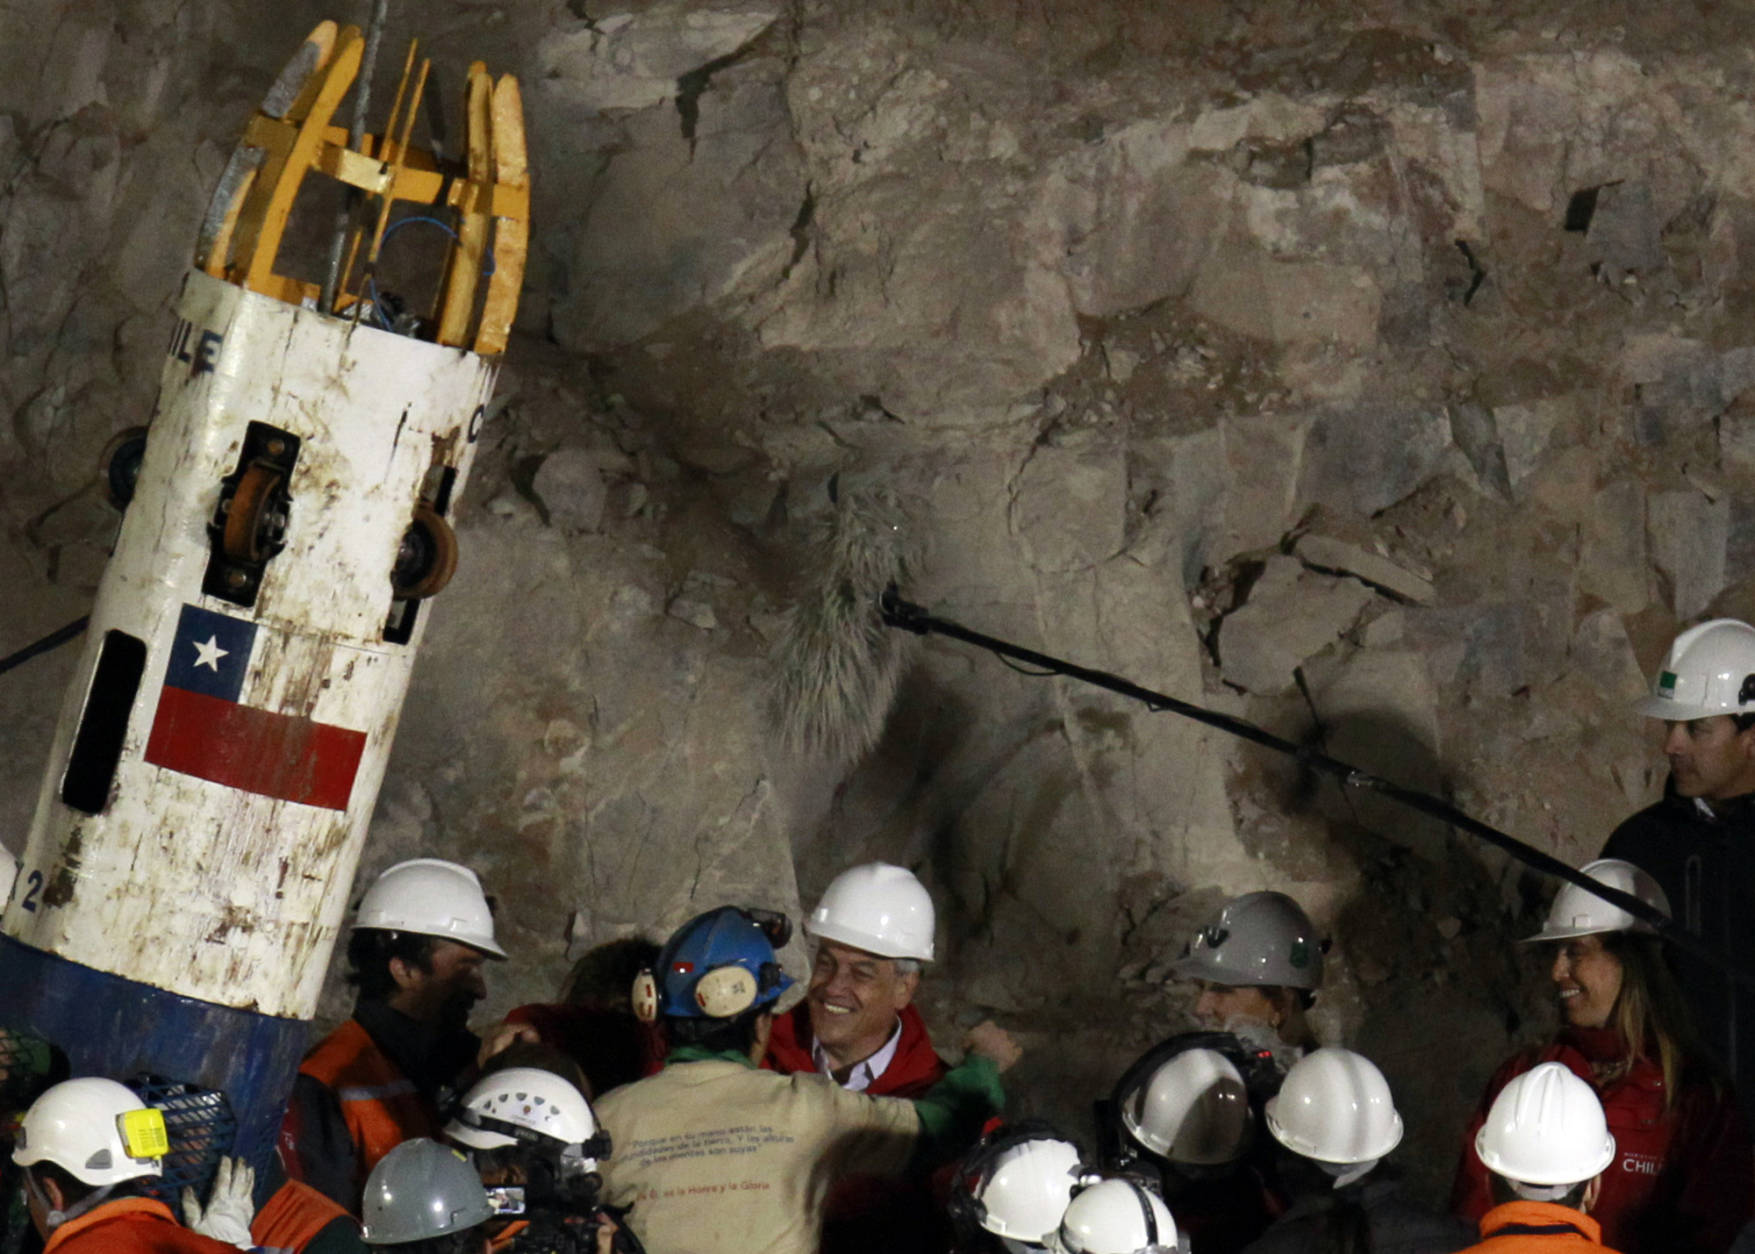 Miner Raul Bustos, center wearing blue helmet, is greeted by Chile's President Sebastian Pinera after his rescue from the collapsed San Jose gold and copper mine where he had been trapped with 32 other miners for over two months near Copiapo, Chile, Wednesday Oct. 13, 2010.   (AP Photo/Jorge Saenz)